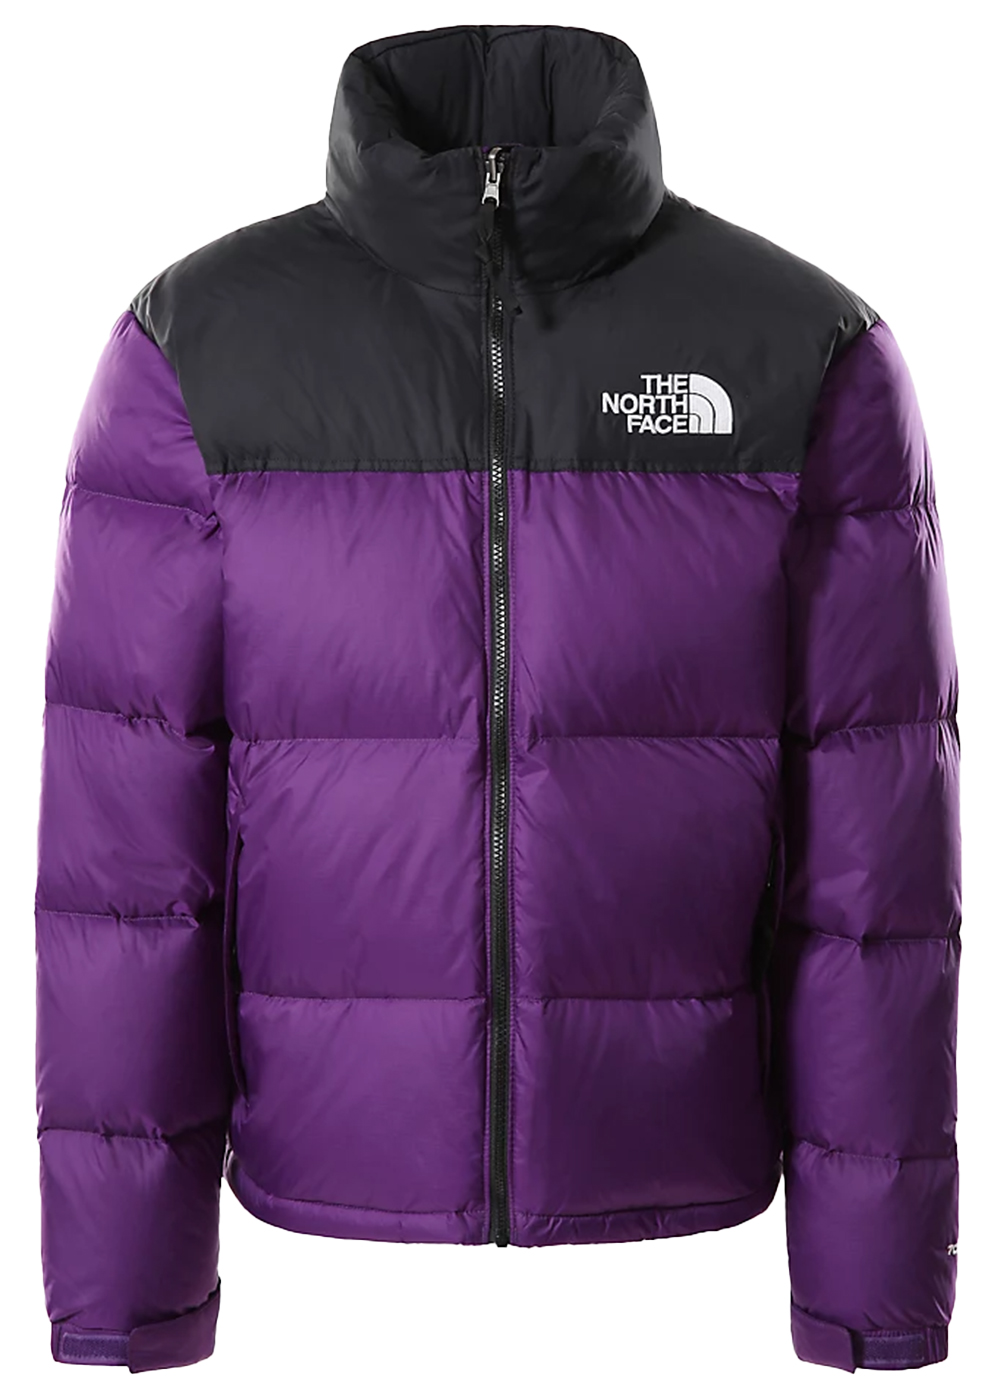 The North Face 1996 Retro Nuptse 700 Fill Packable Jacket Gravity